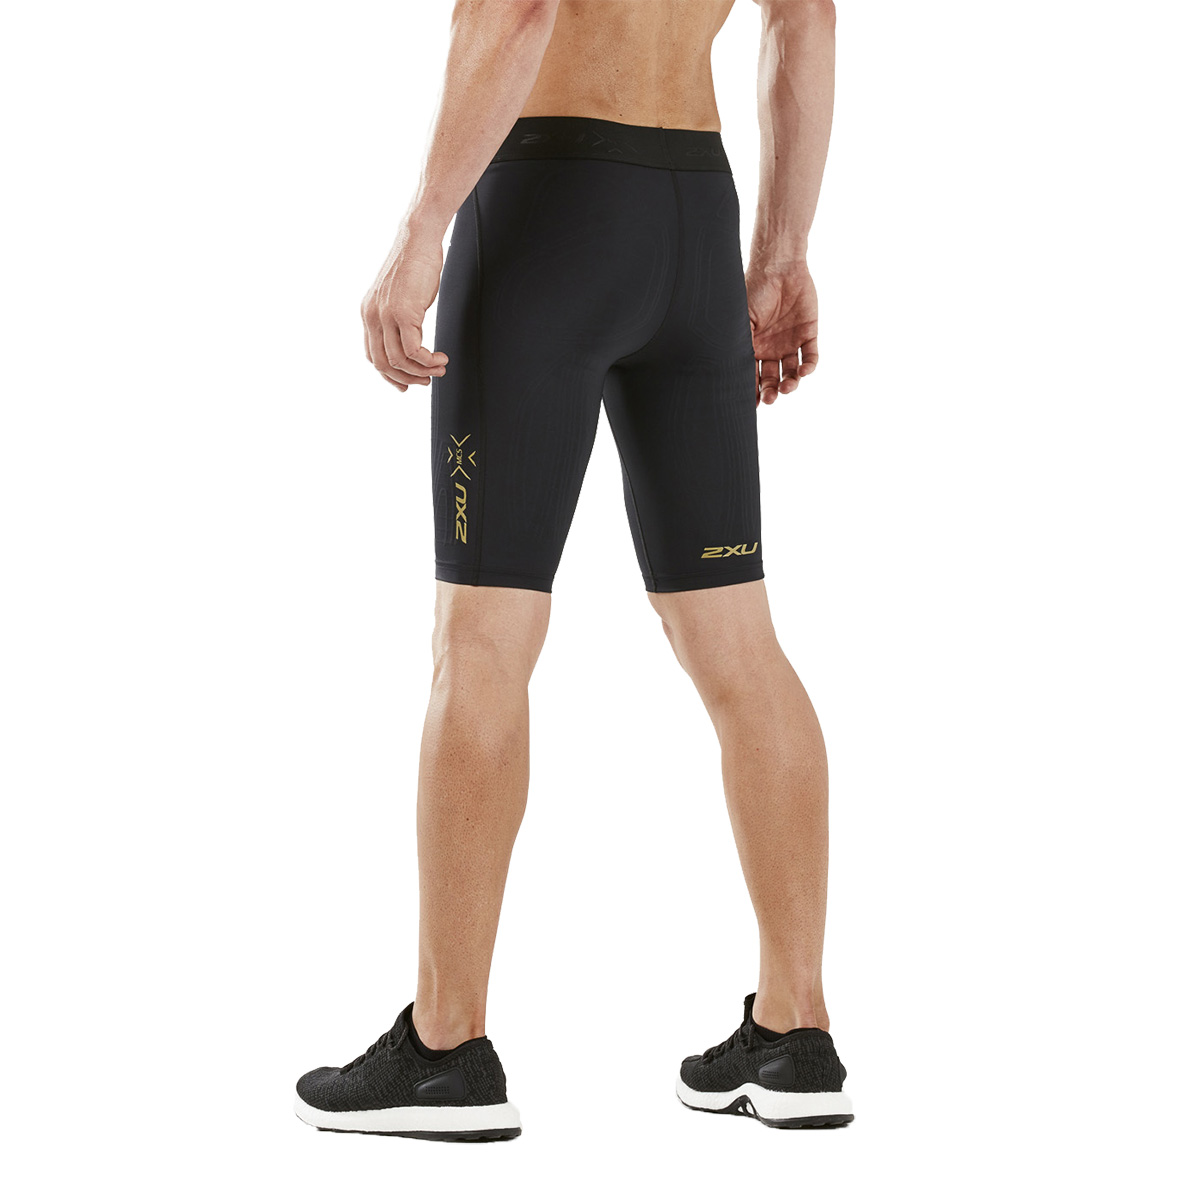 2XU MCS X-Training Compression Short, , large image number null